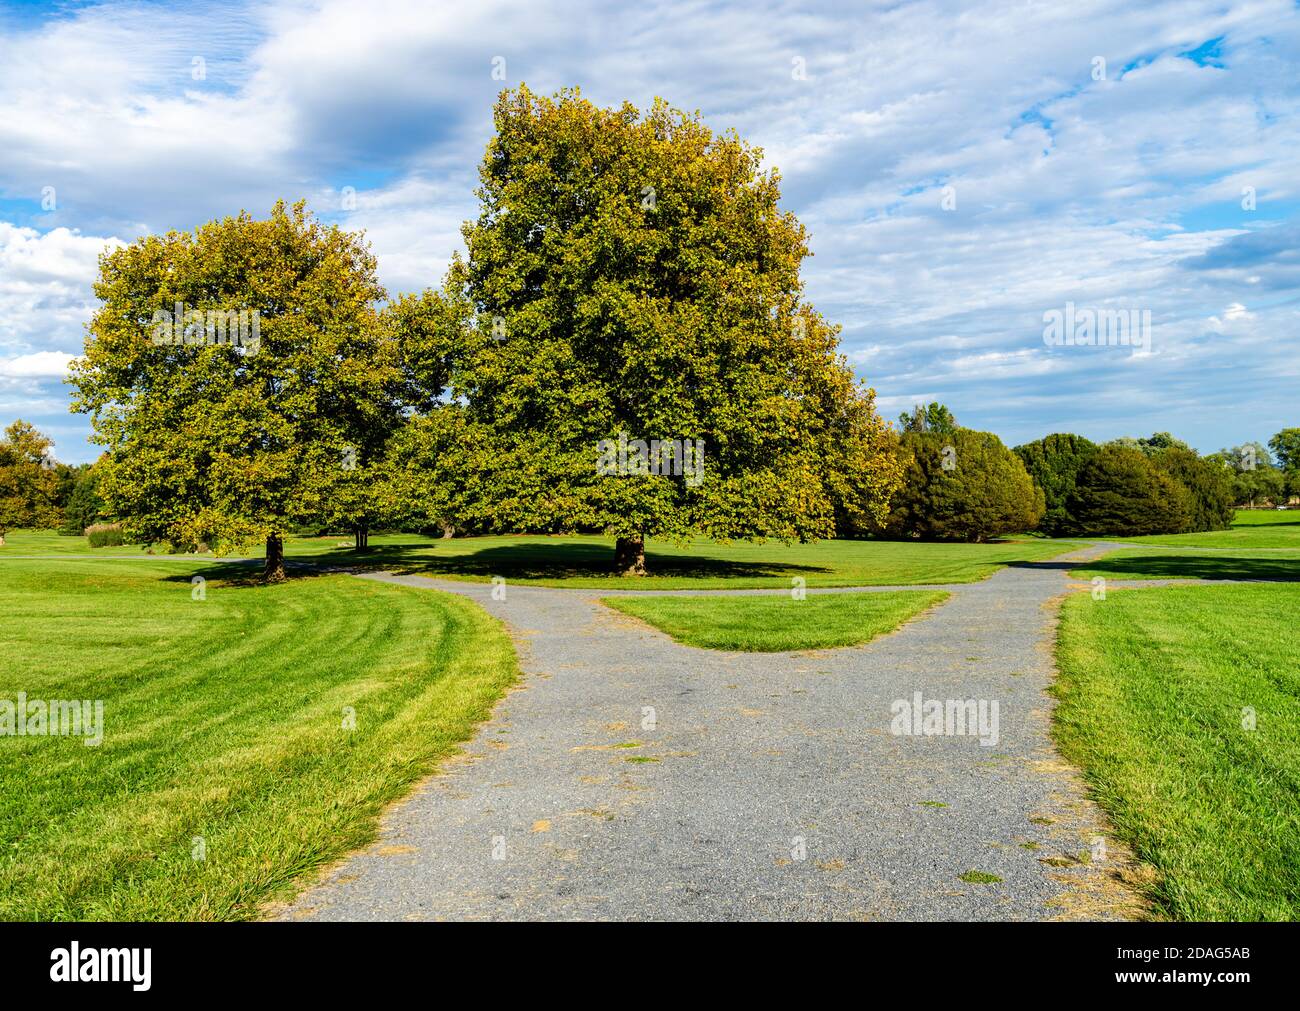 Walking path in a park splits into two directions Stock Photo